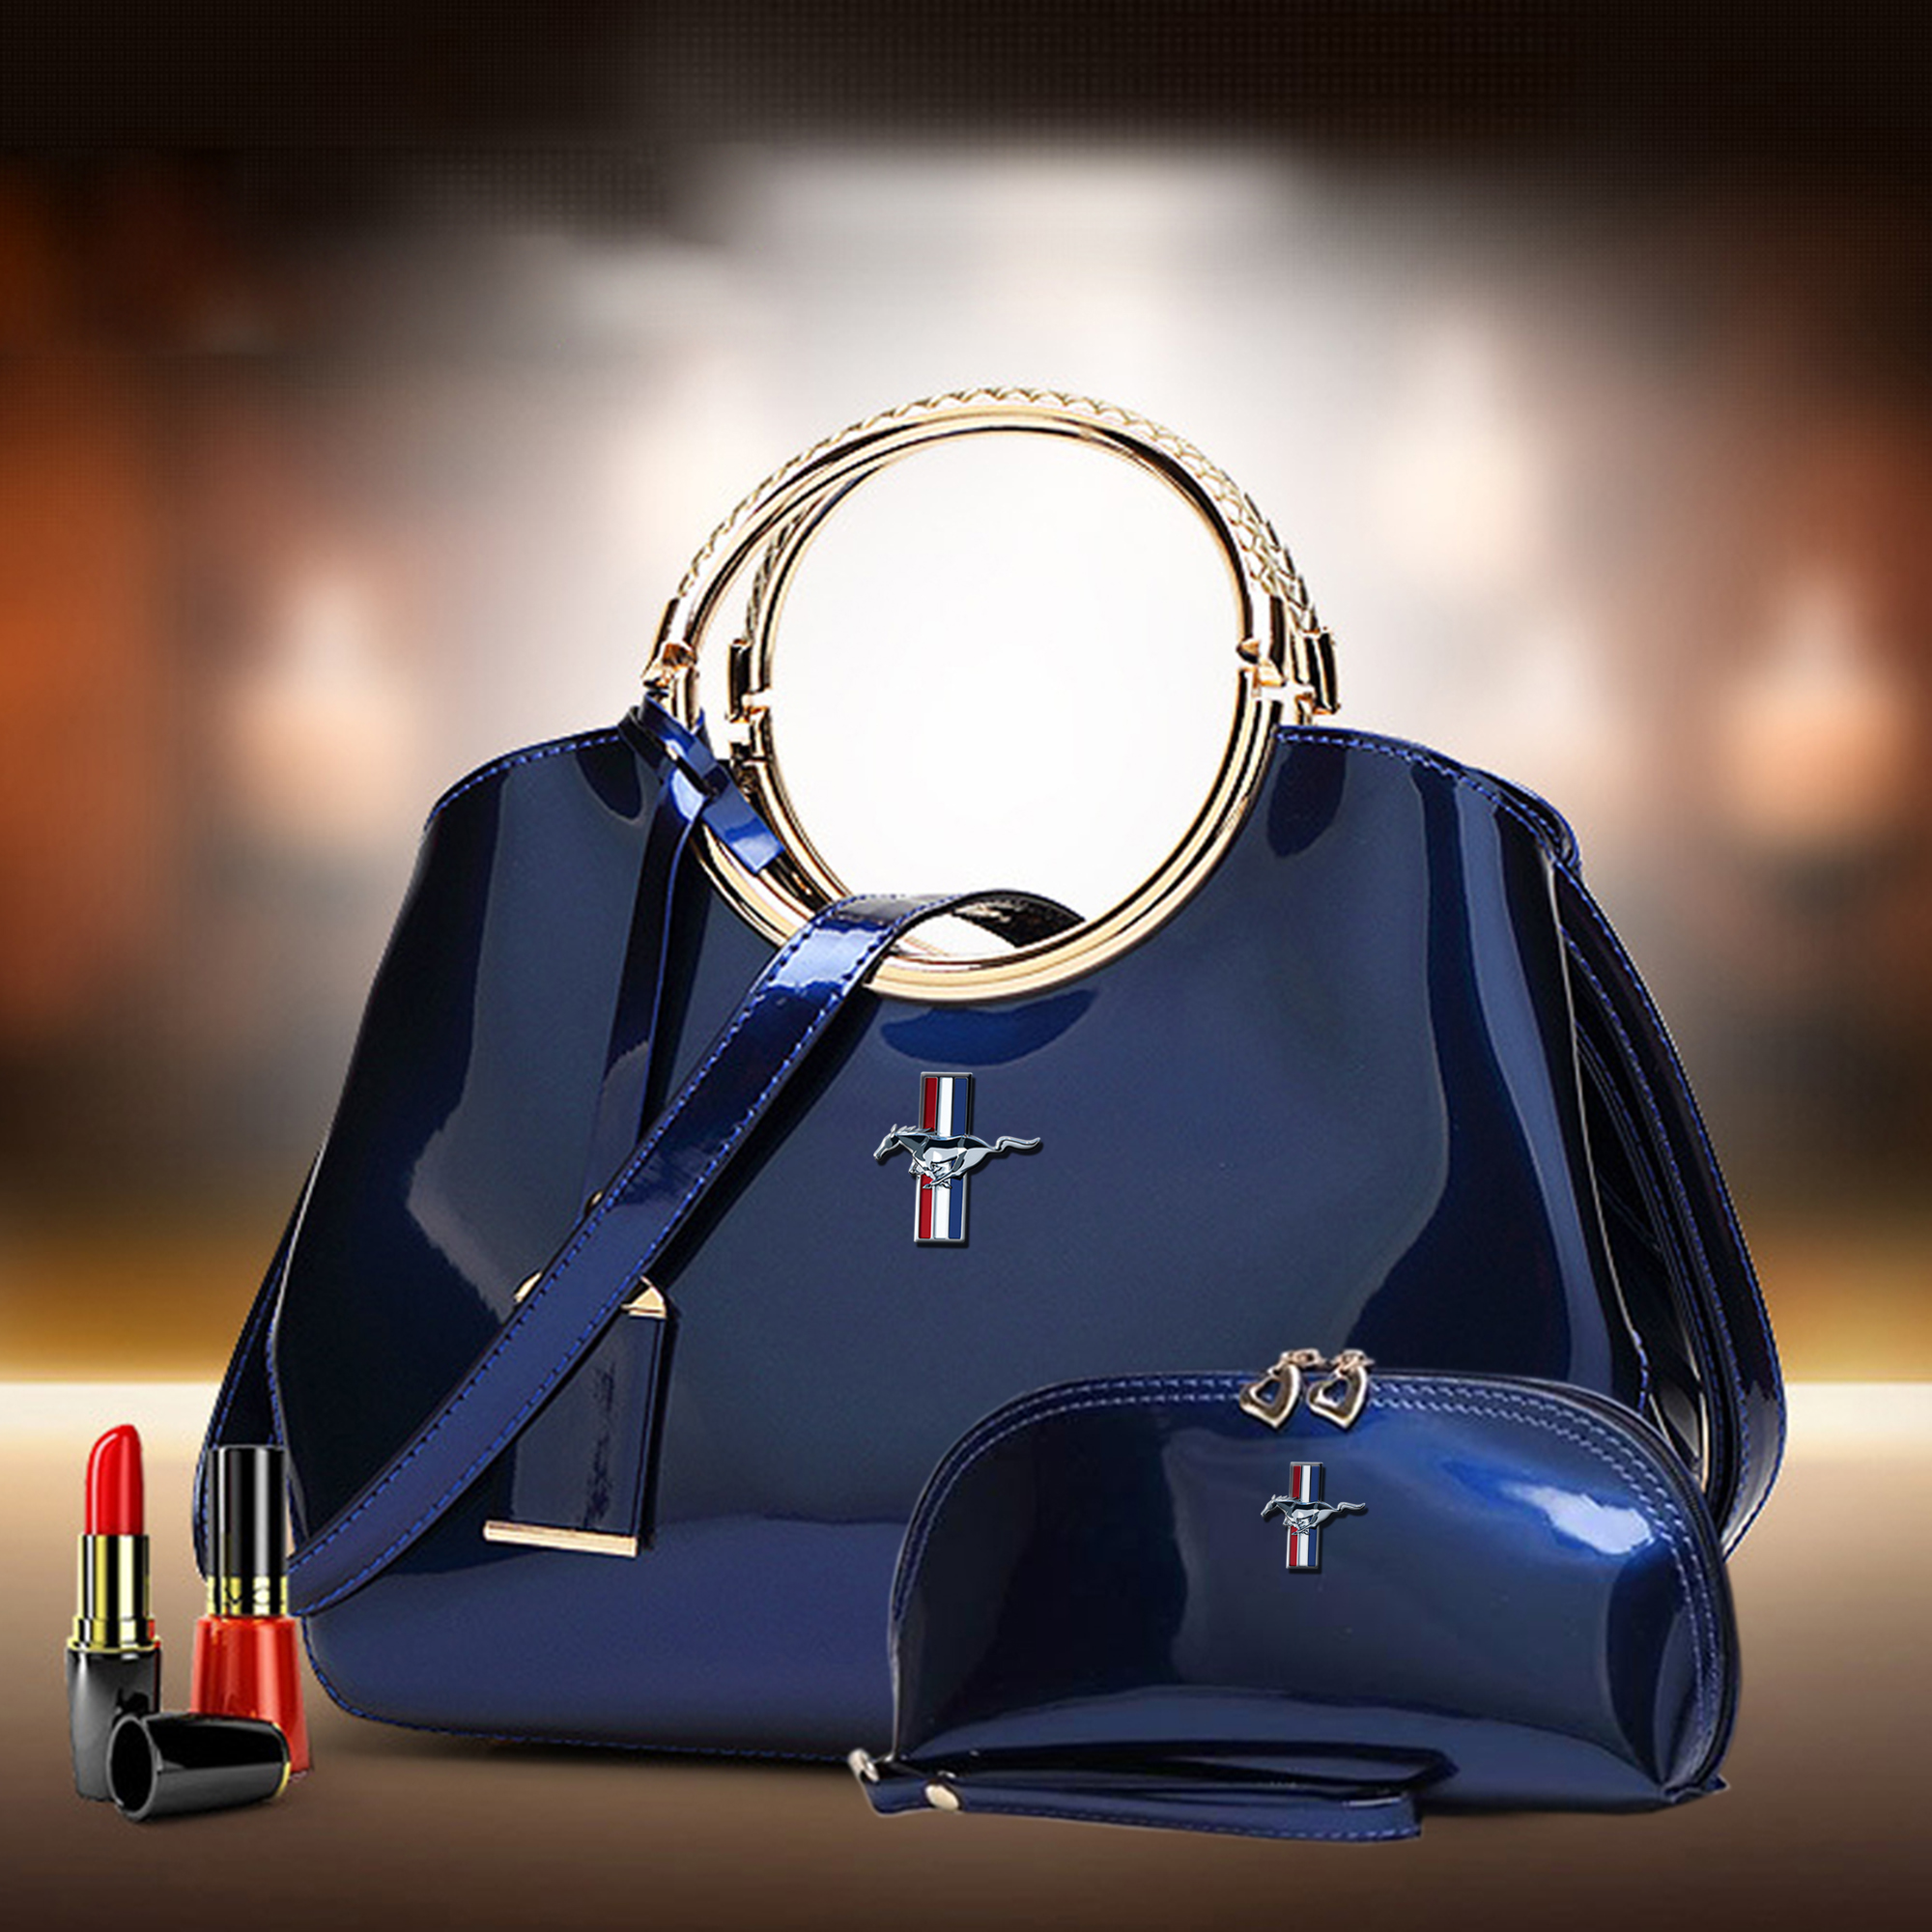 Mustang Luxury Purses With Free Matching Wallets - Tana Elegant